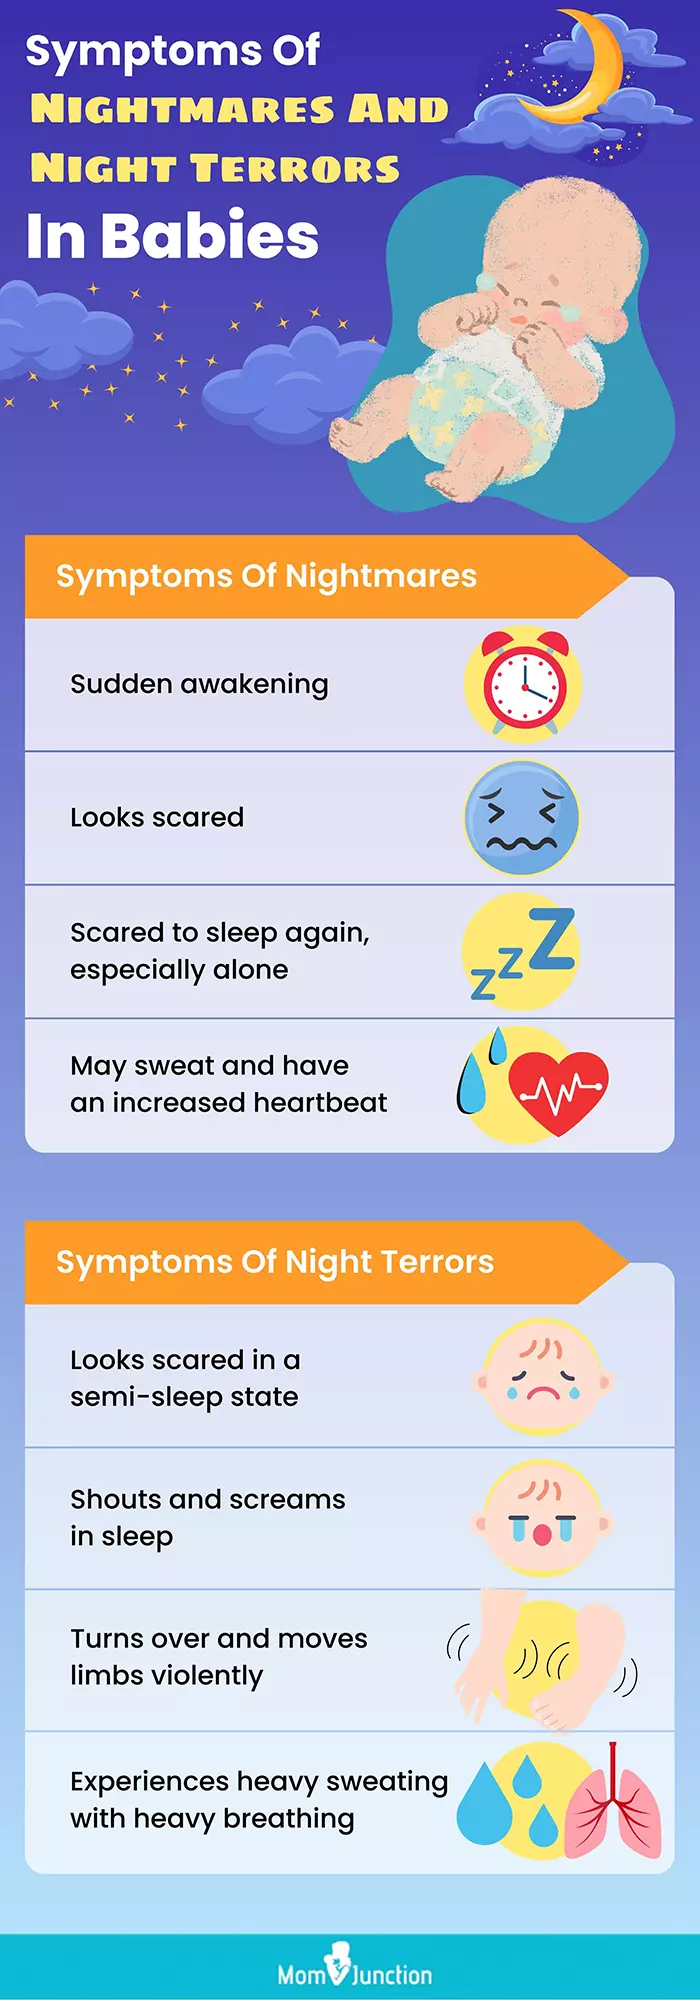 symptoms of nightmares and night terrors in babies (infographic)